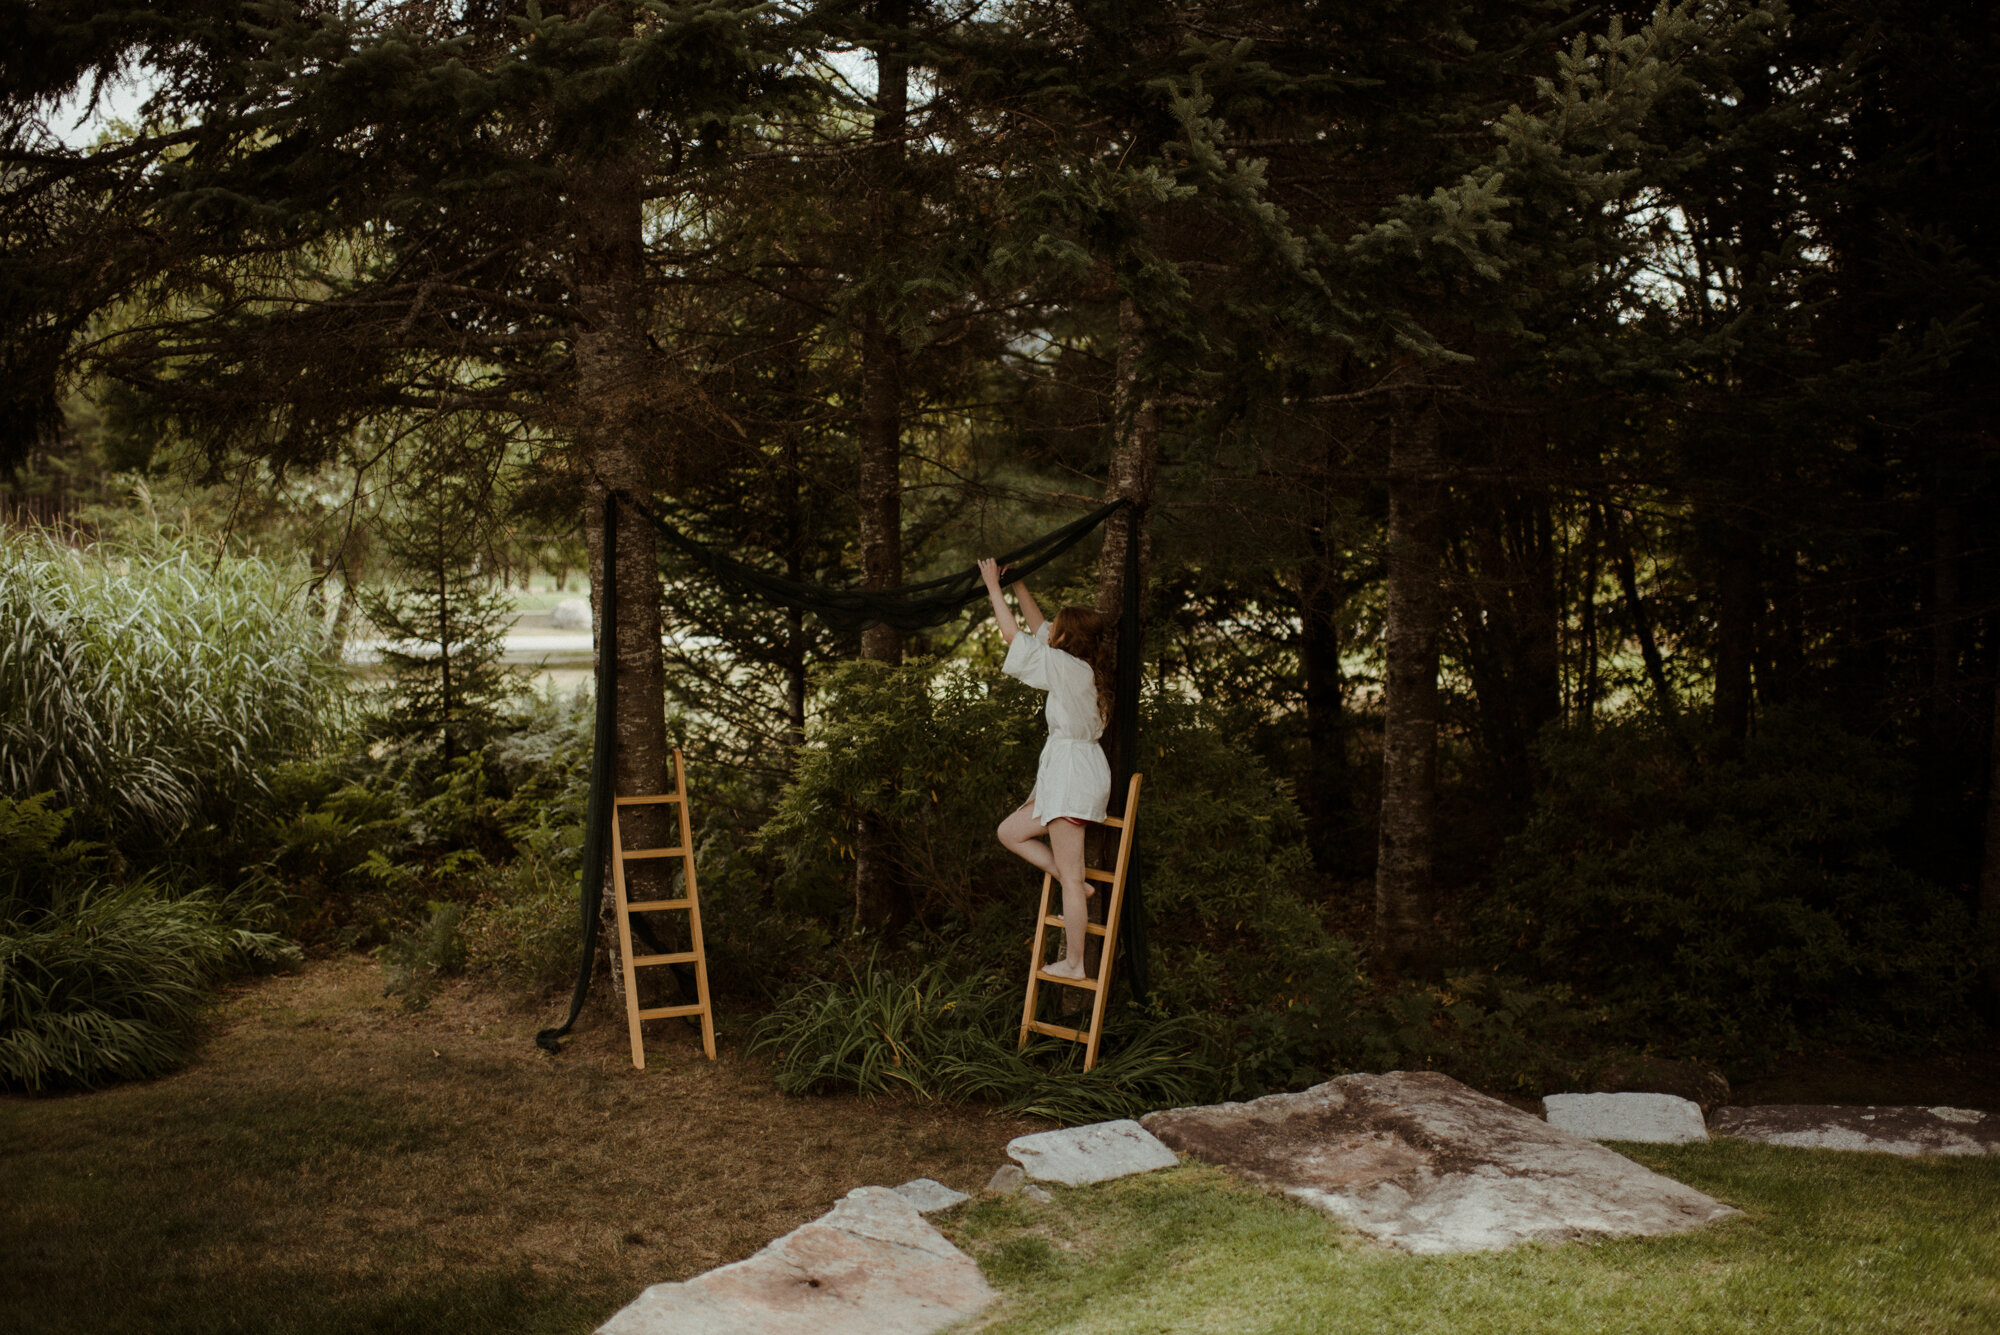 Autumn Elopement in New Hampshire - Backyard Wedding during COVID and Sunrise Hike in Wedding Dress - White Sails Creative_14.jpg